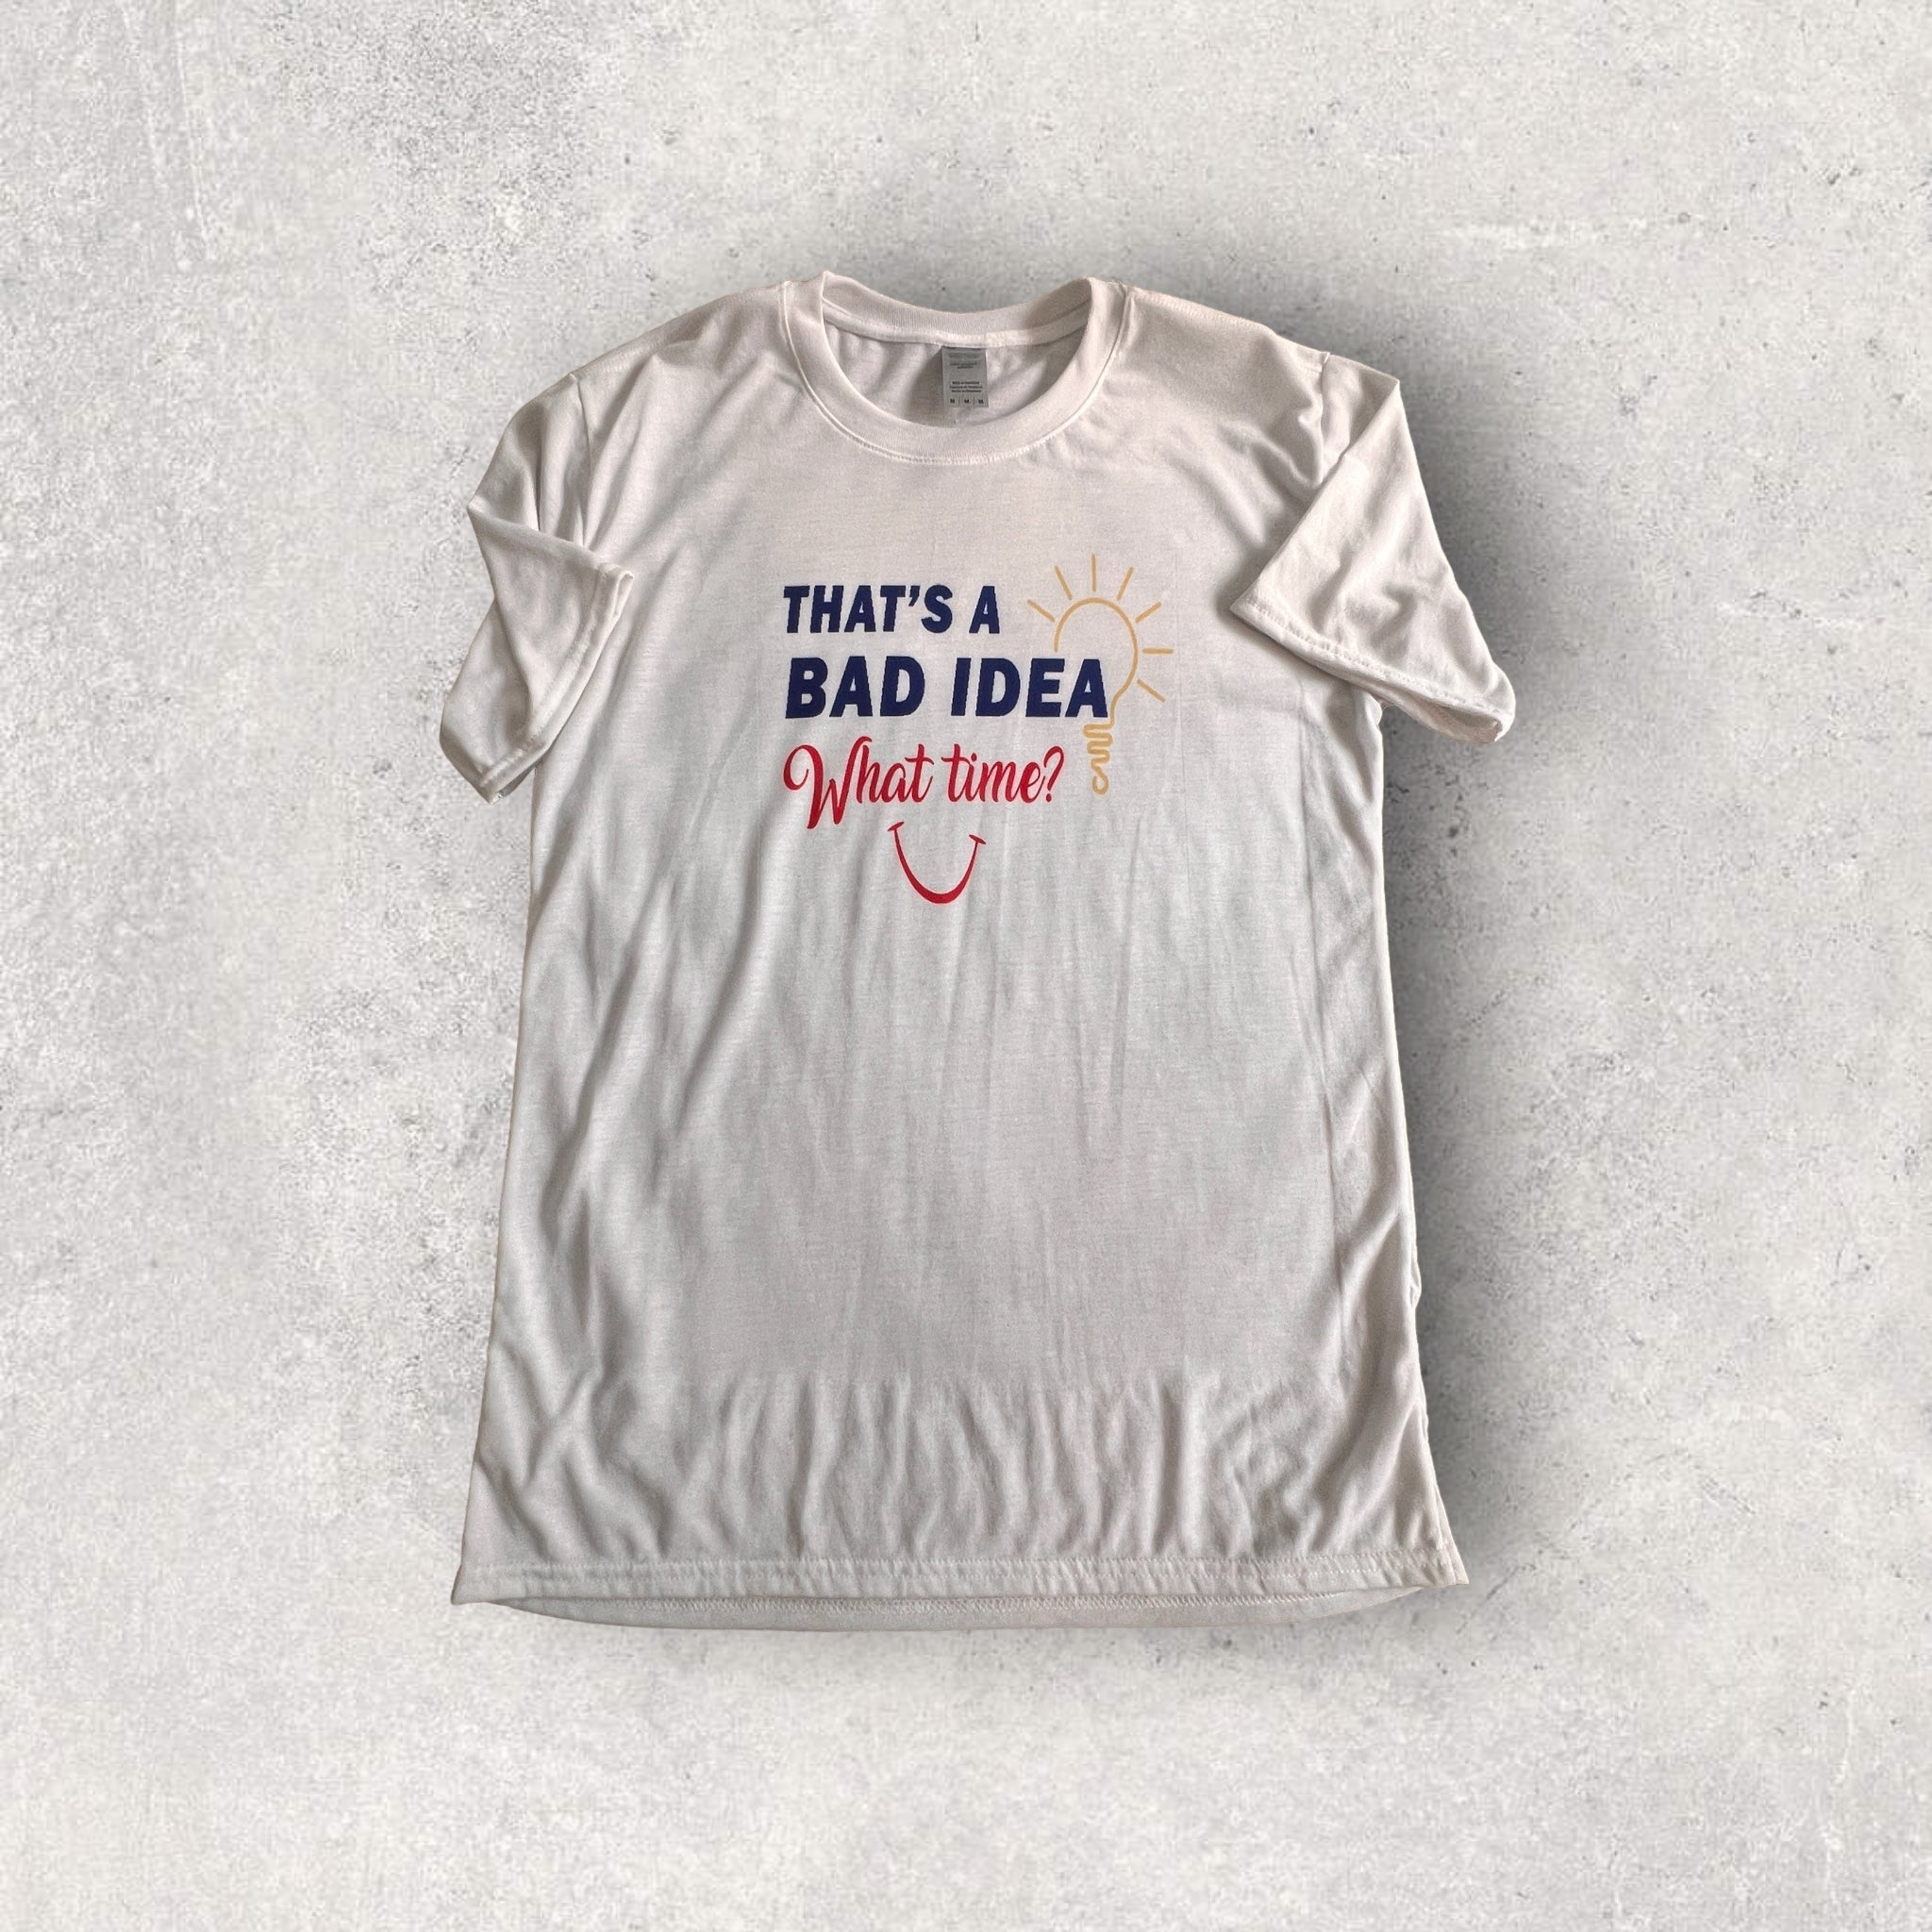 😏🕒 "That's a Bad Idea, What Time?" Performance T-Shirt 🤘🌟 - Size Medium